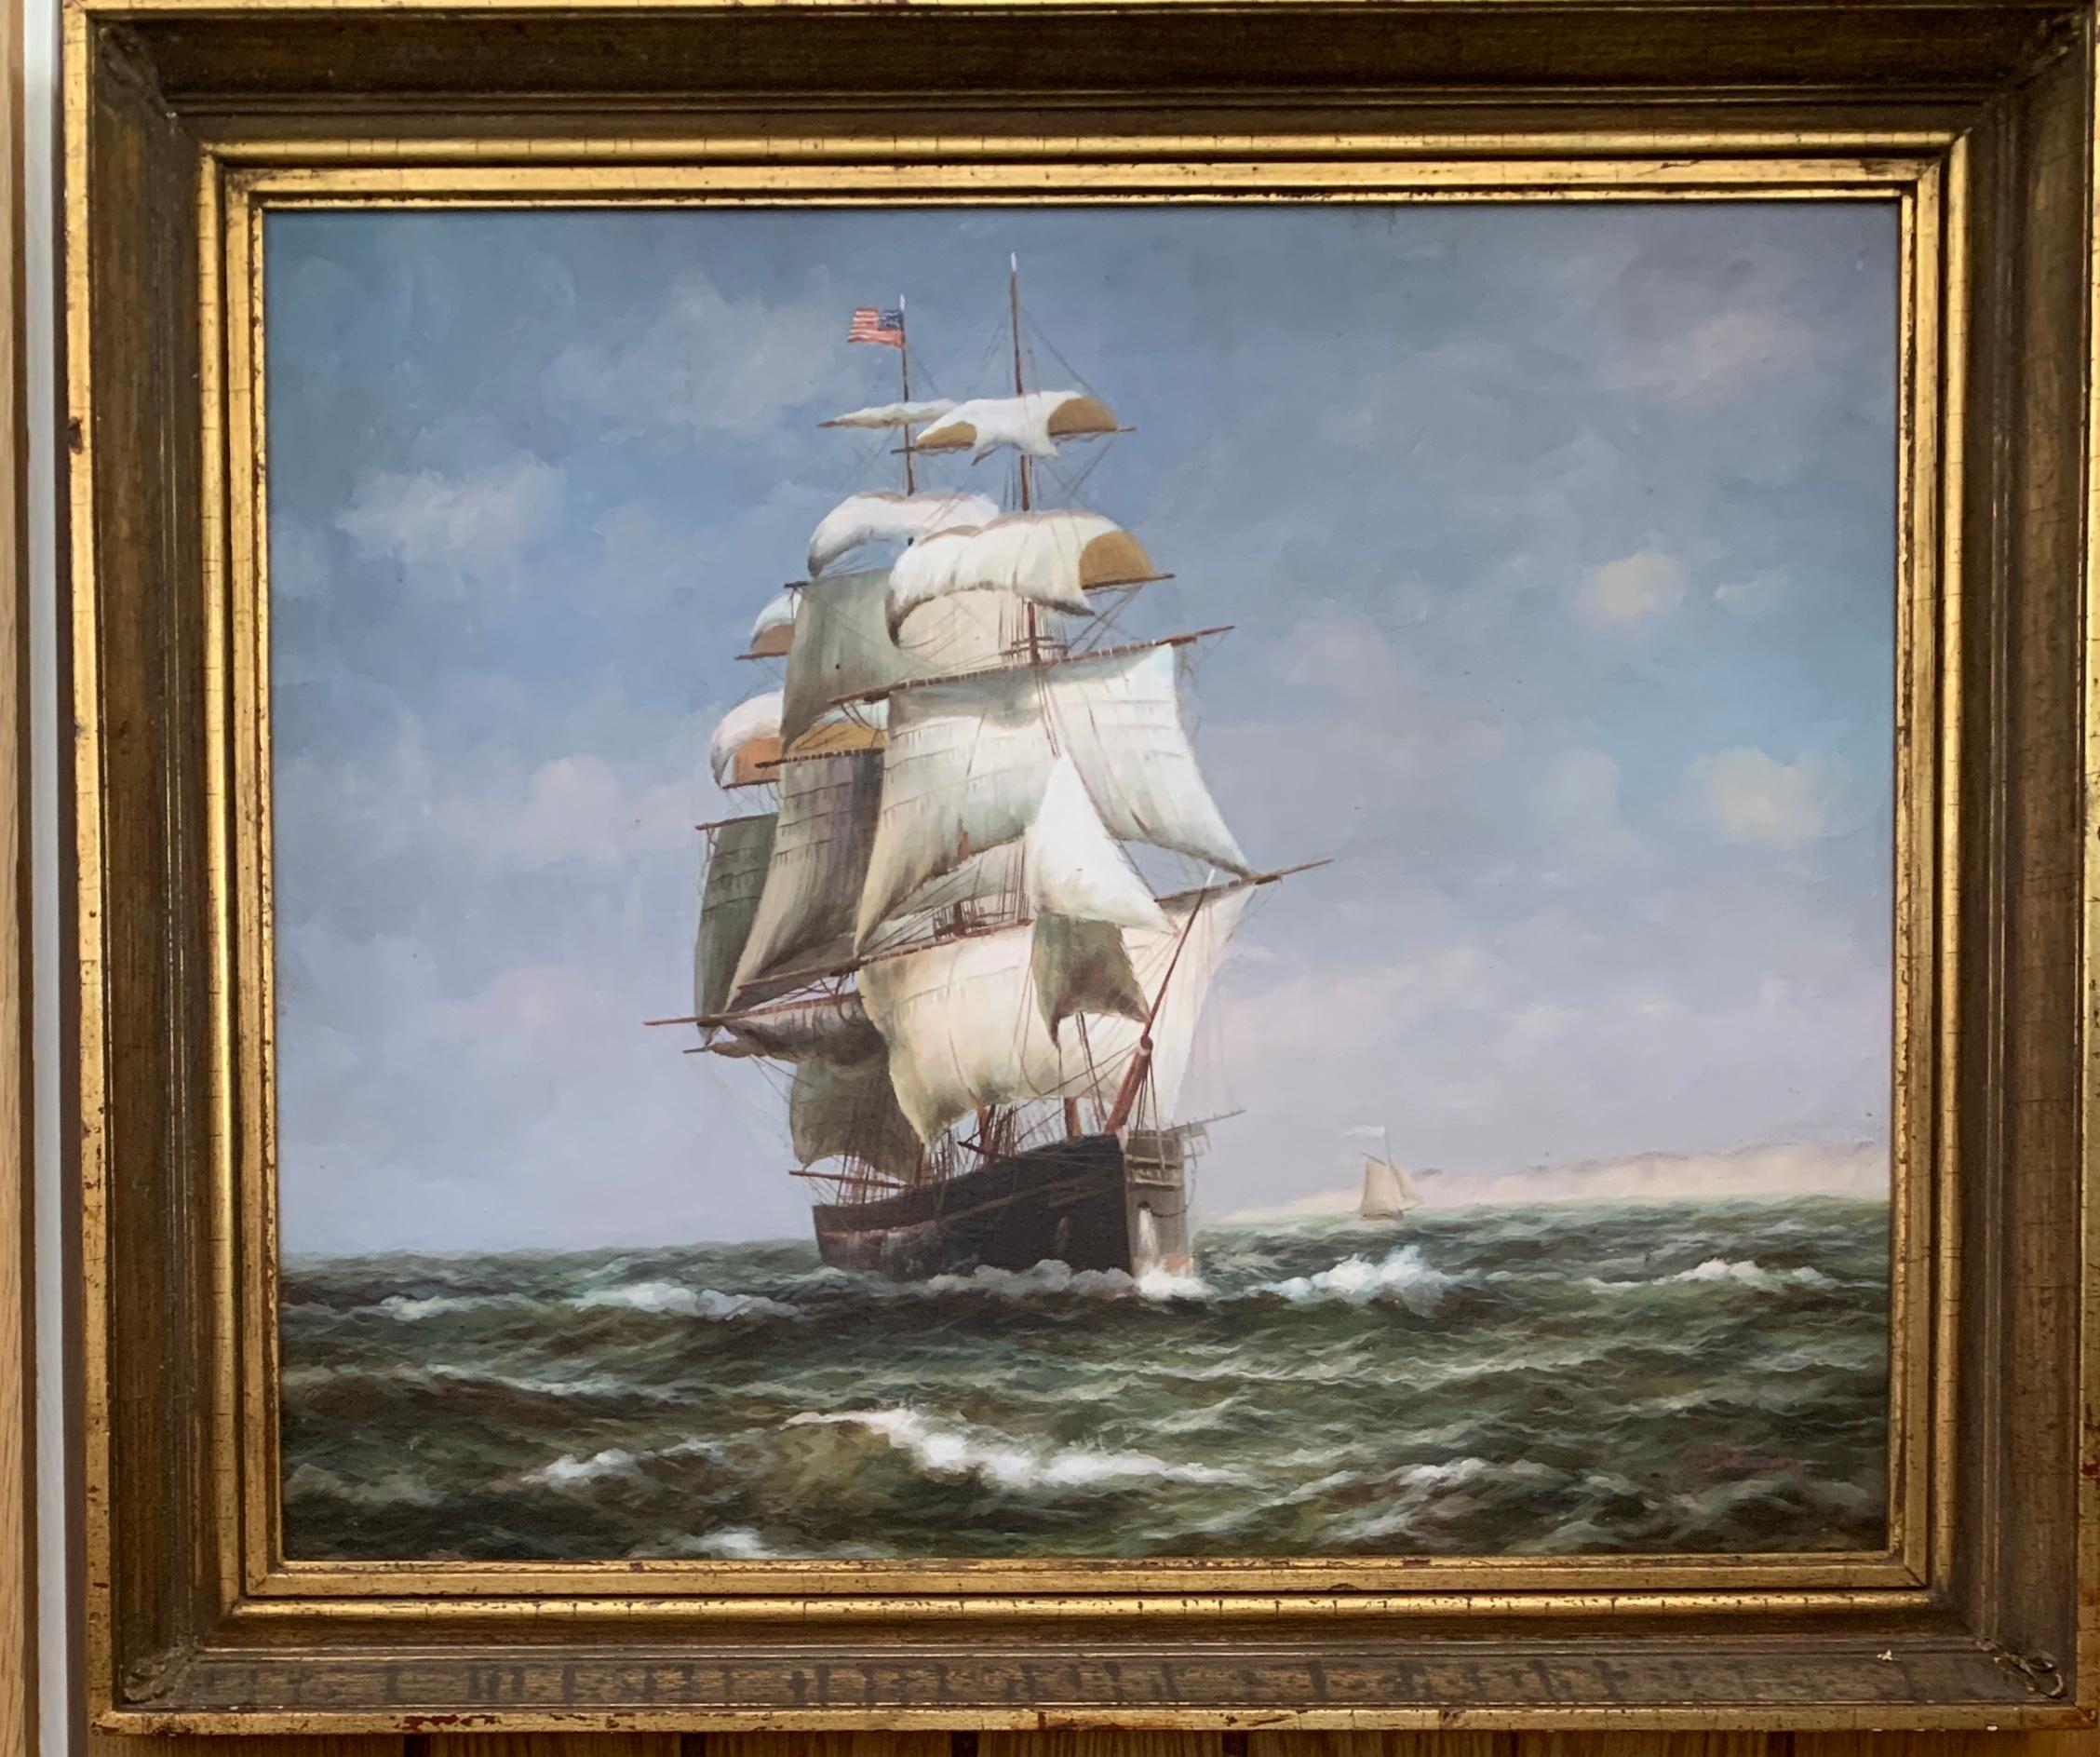 P.J.Levin Figurative Painting - 19th century style American tea clipper-sailboat at sea with a landscape beyond.